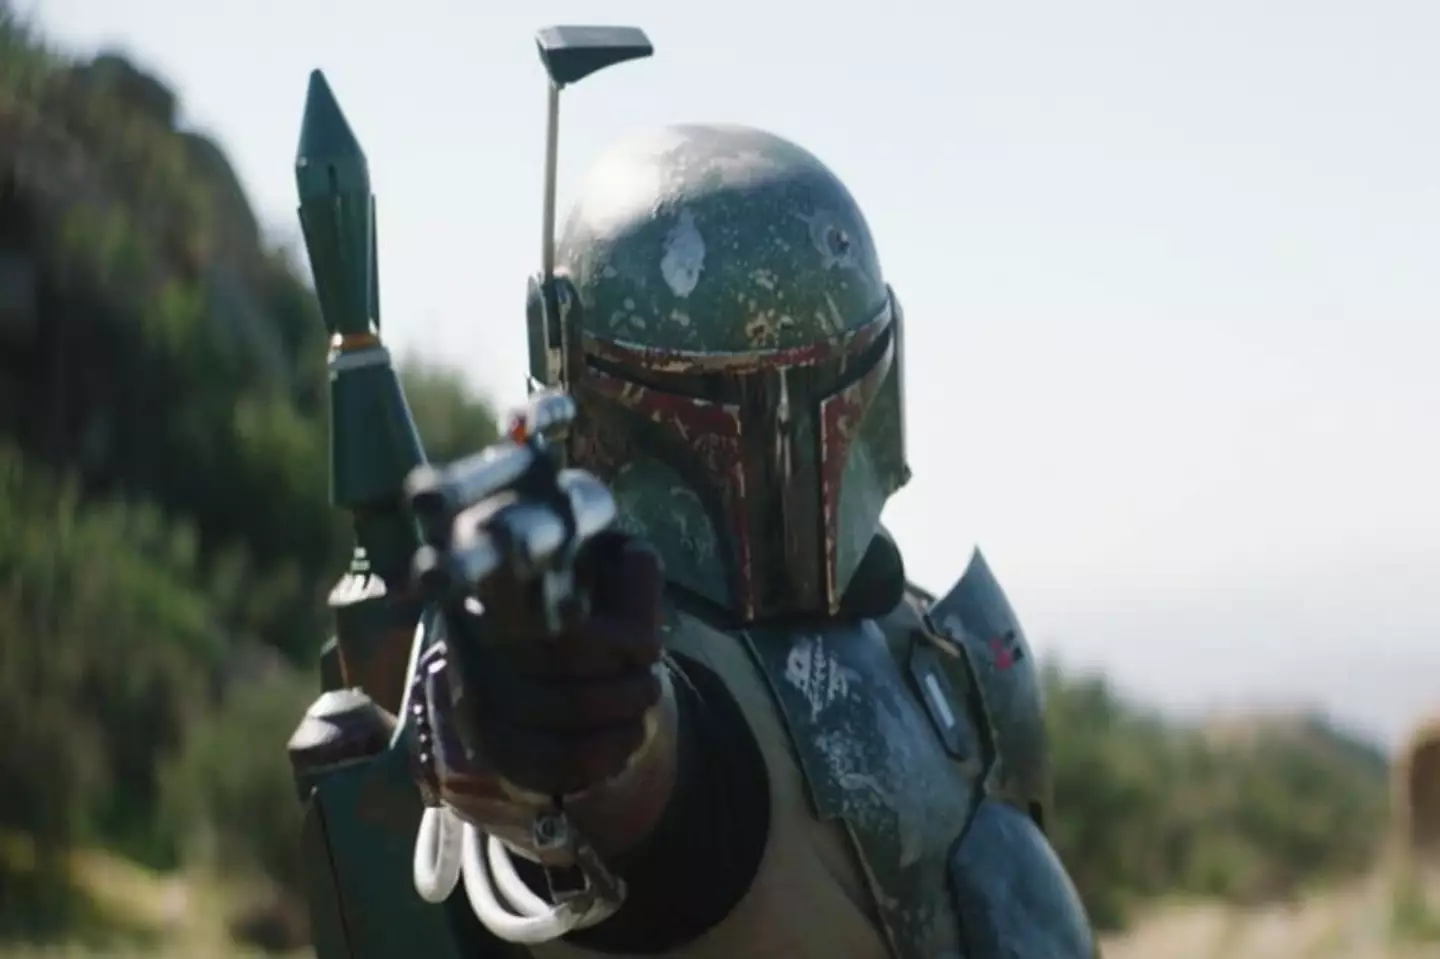 "I was supposed to be in The Mandalorian season three, but nobody rang me."